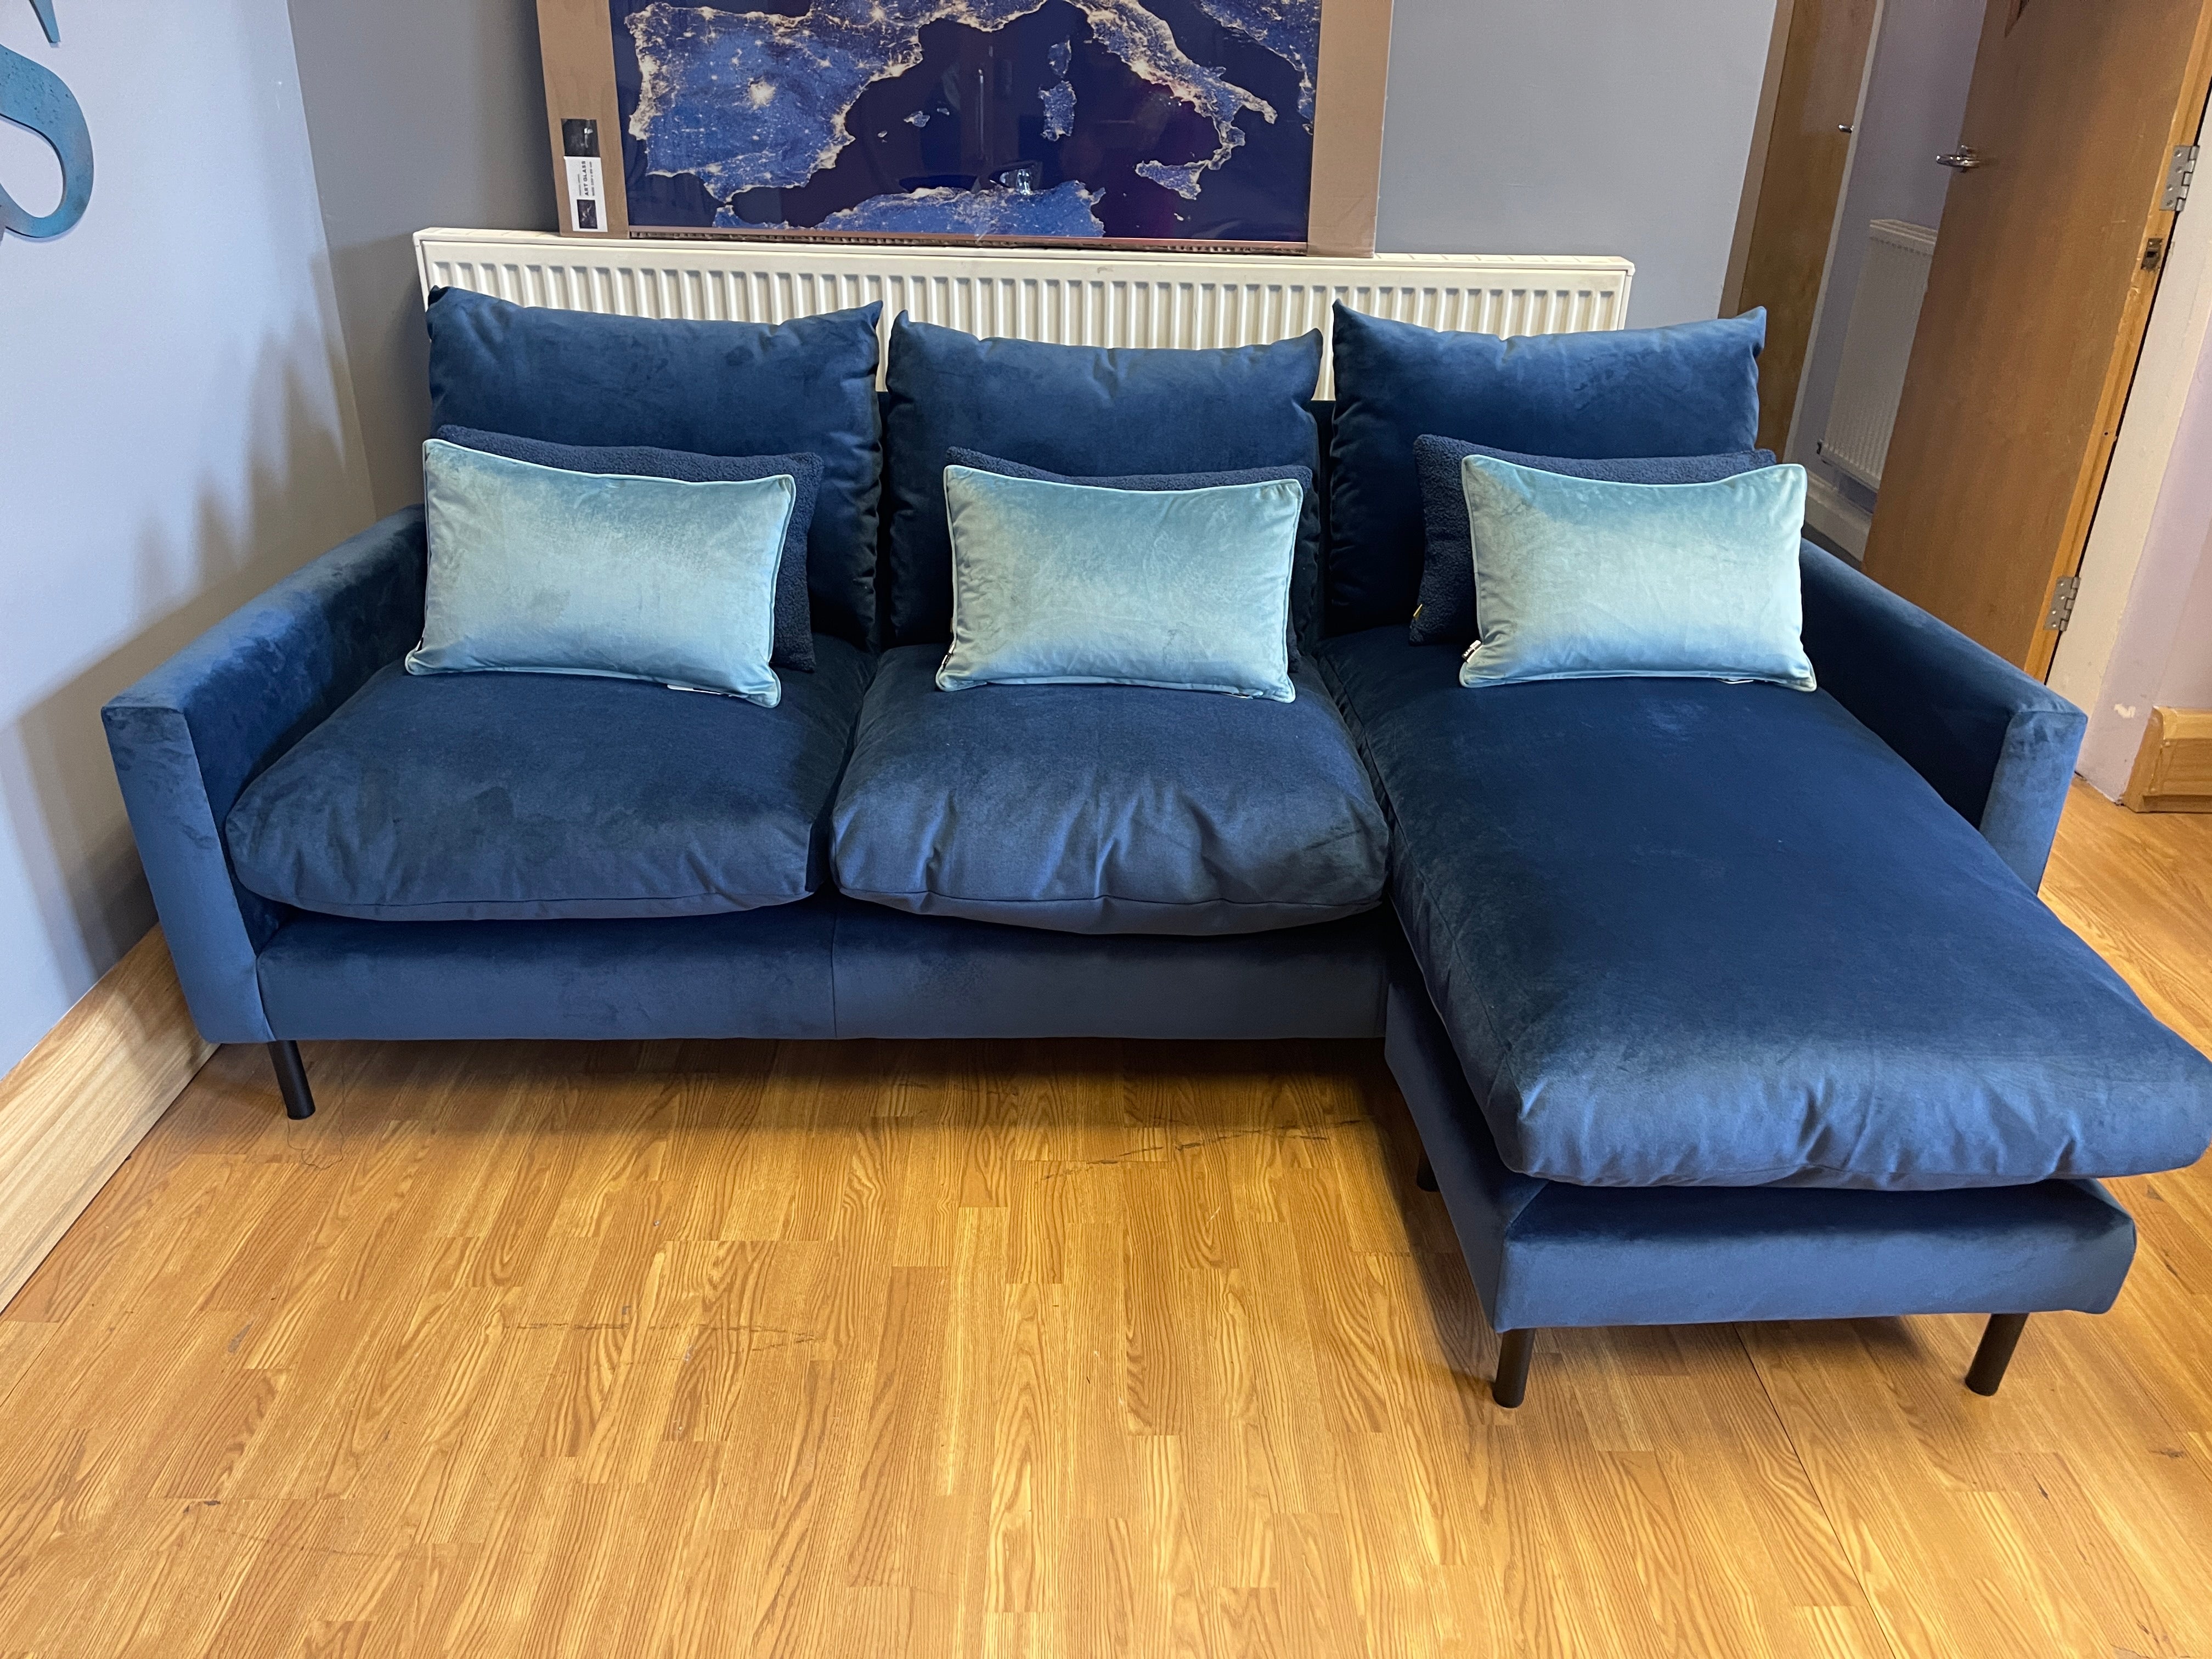 MADE.COM RUSSO 3 seater standard back left or right facing chaise sofa in royal blue velvet fabric